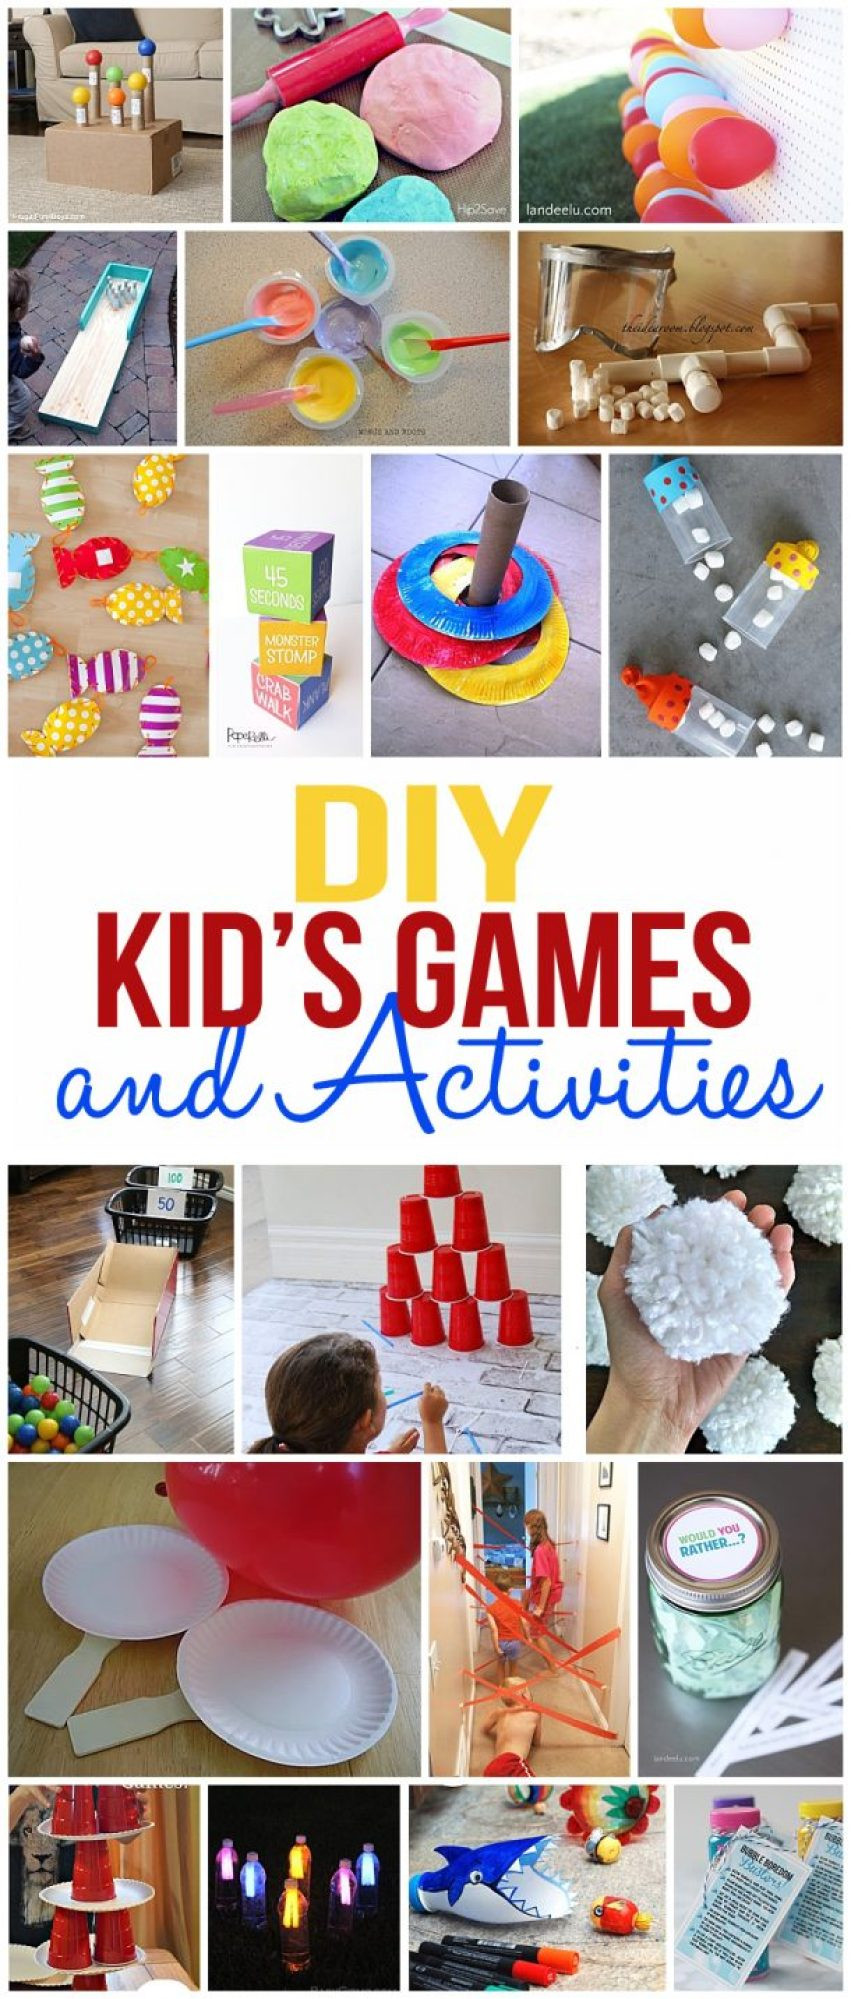 DIY Games For Kids
 DIY Kids Games and Activities for Indoors or Outdoors